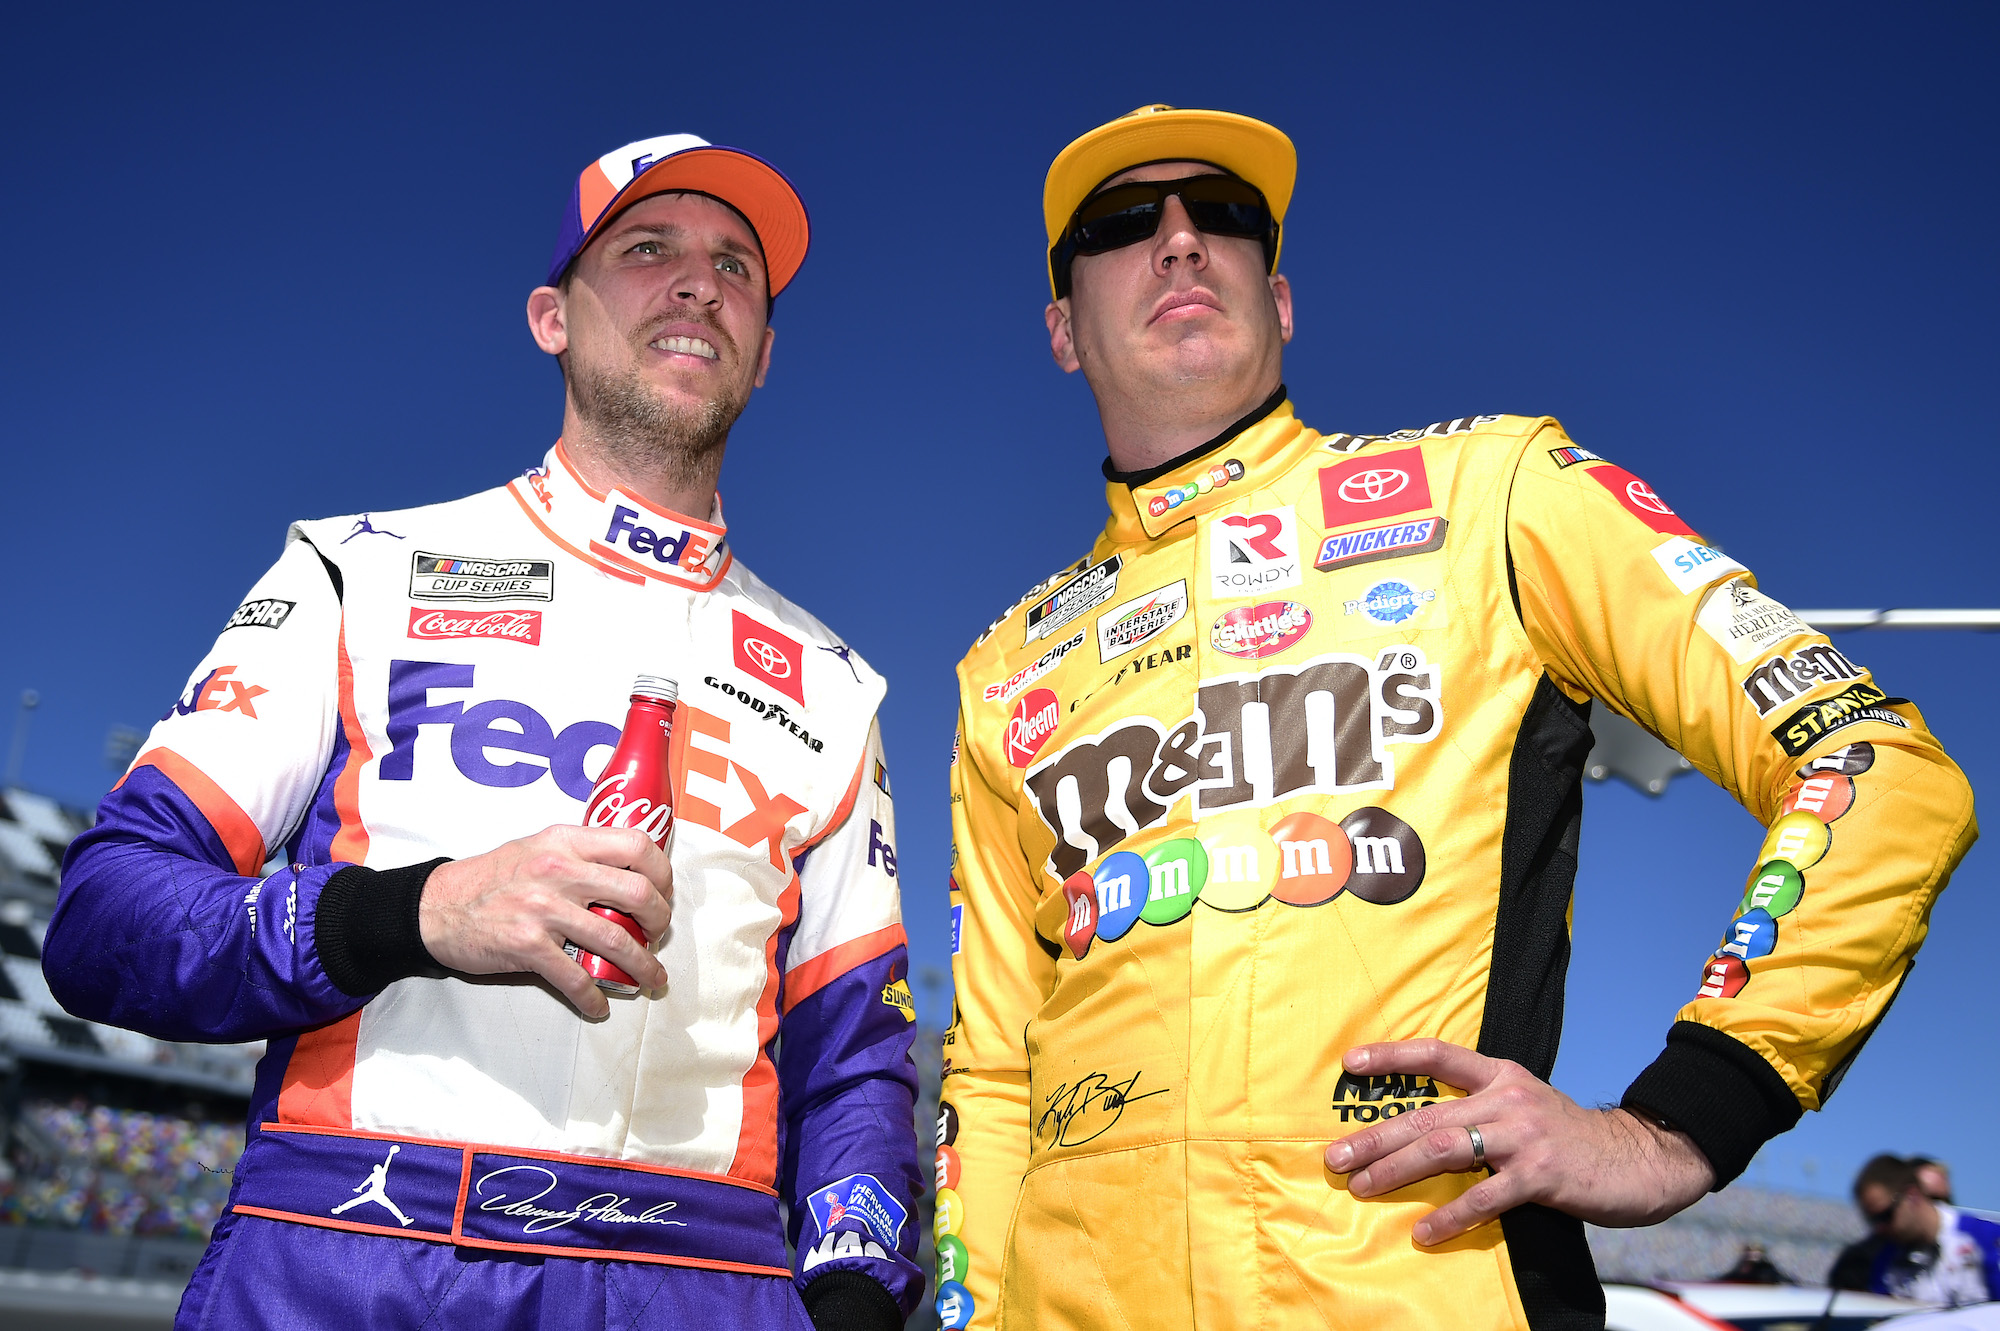 Somber Kyle Busch Avoids Admitting to Embarrassing Mistake at Darlington, but Denny Hamlin Does It For Him